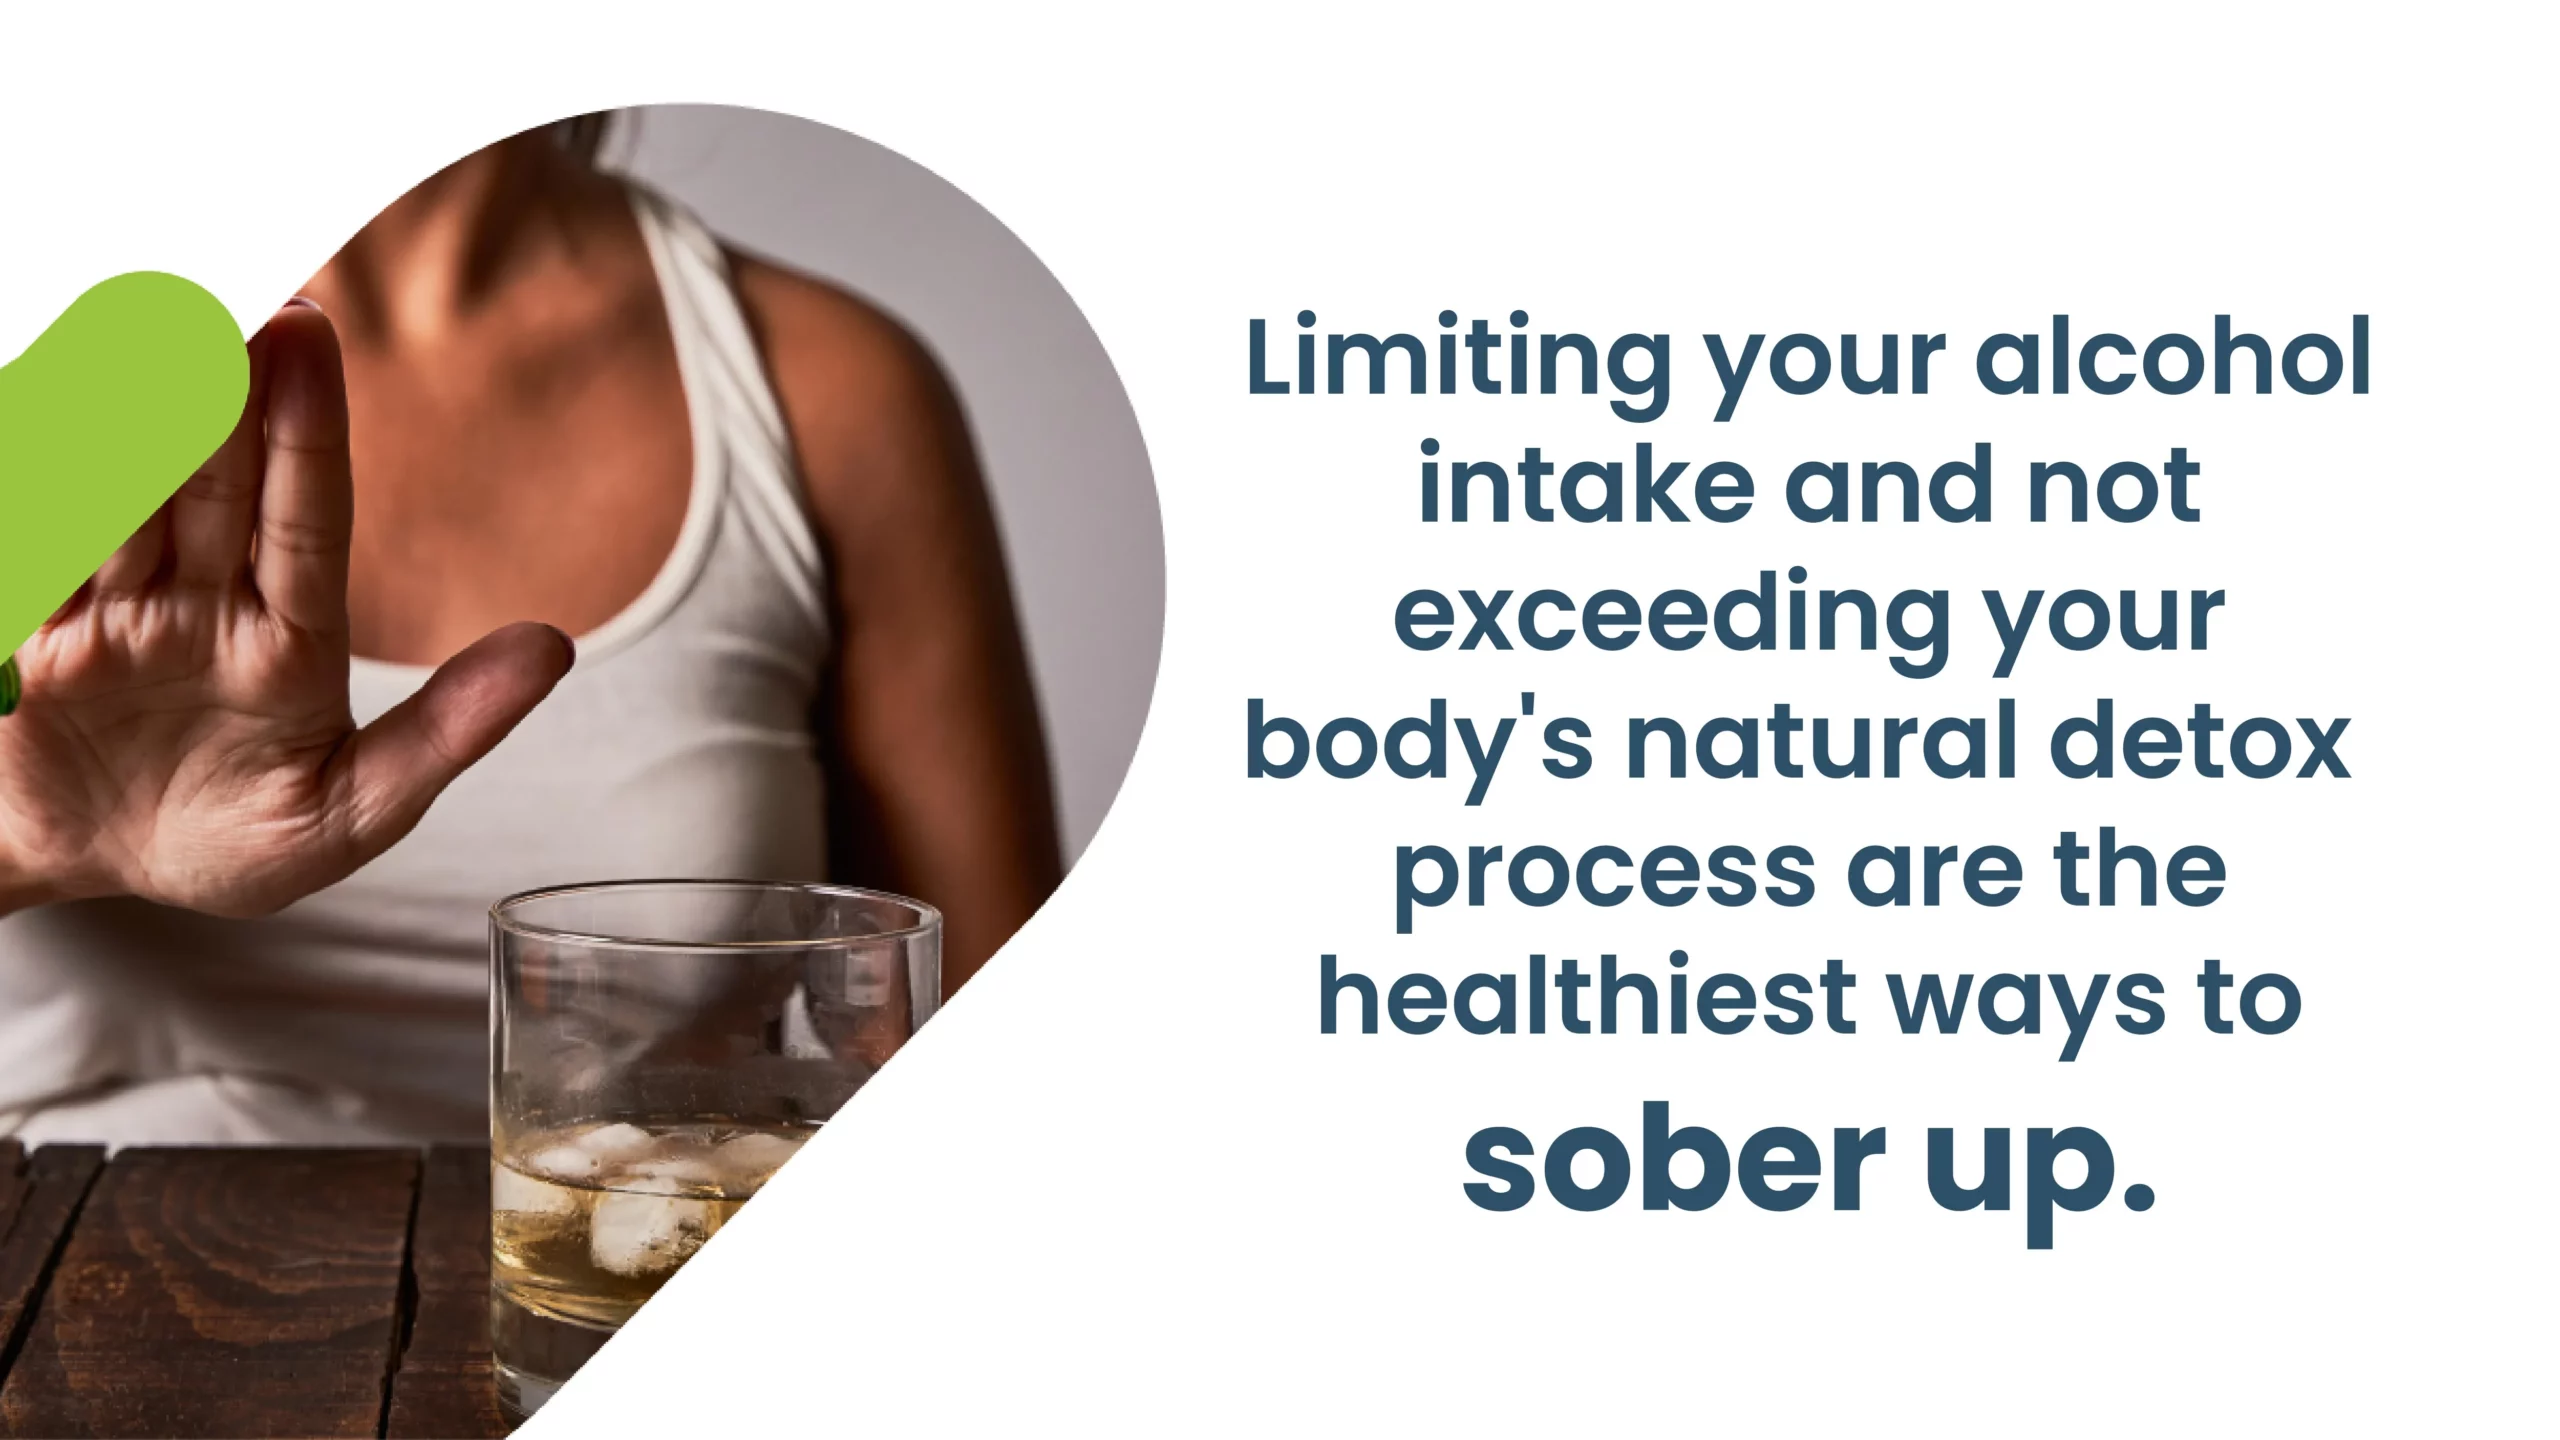 How to sober up fast: Limiting your alcohol intake and not exceeding your body's natural detox process are the healthiest ways to sober up.